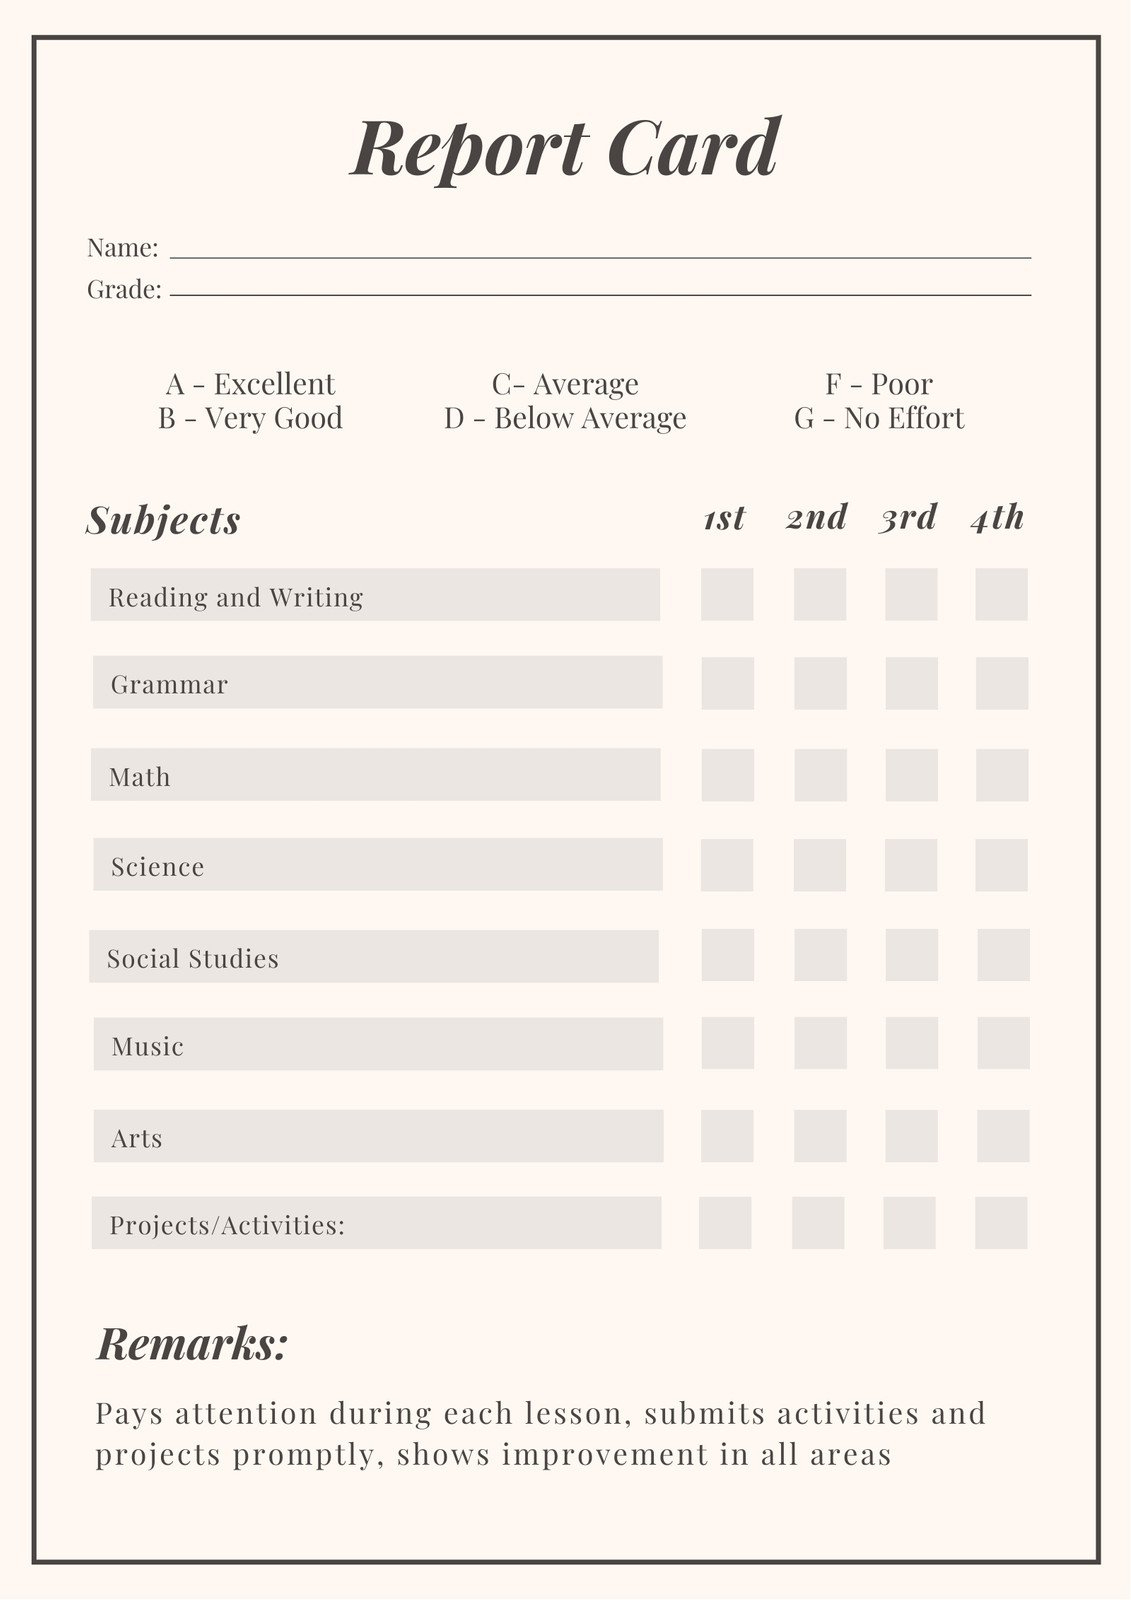 Free, Printable, Customizable Report Card Templates | Canva for Free Printable Grade Cards